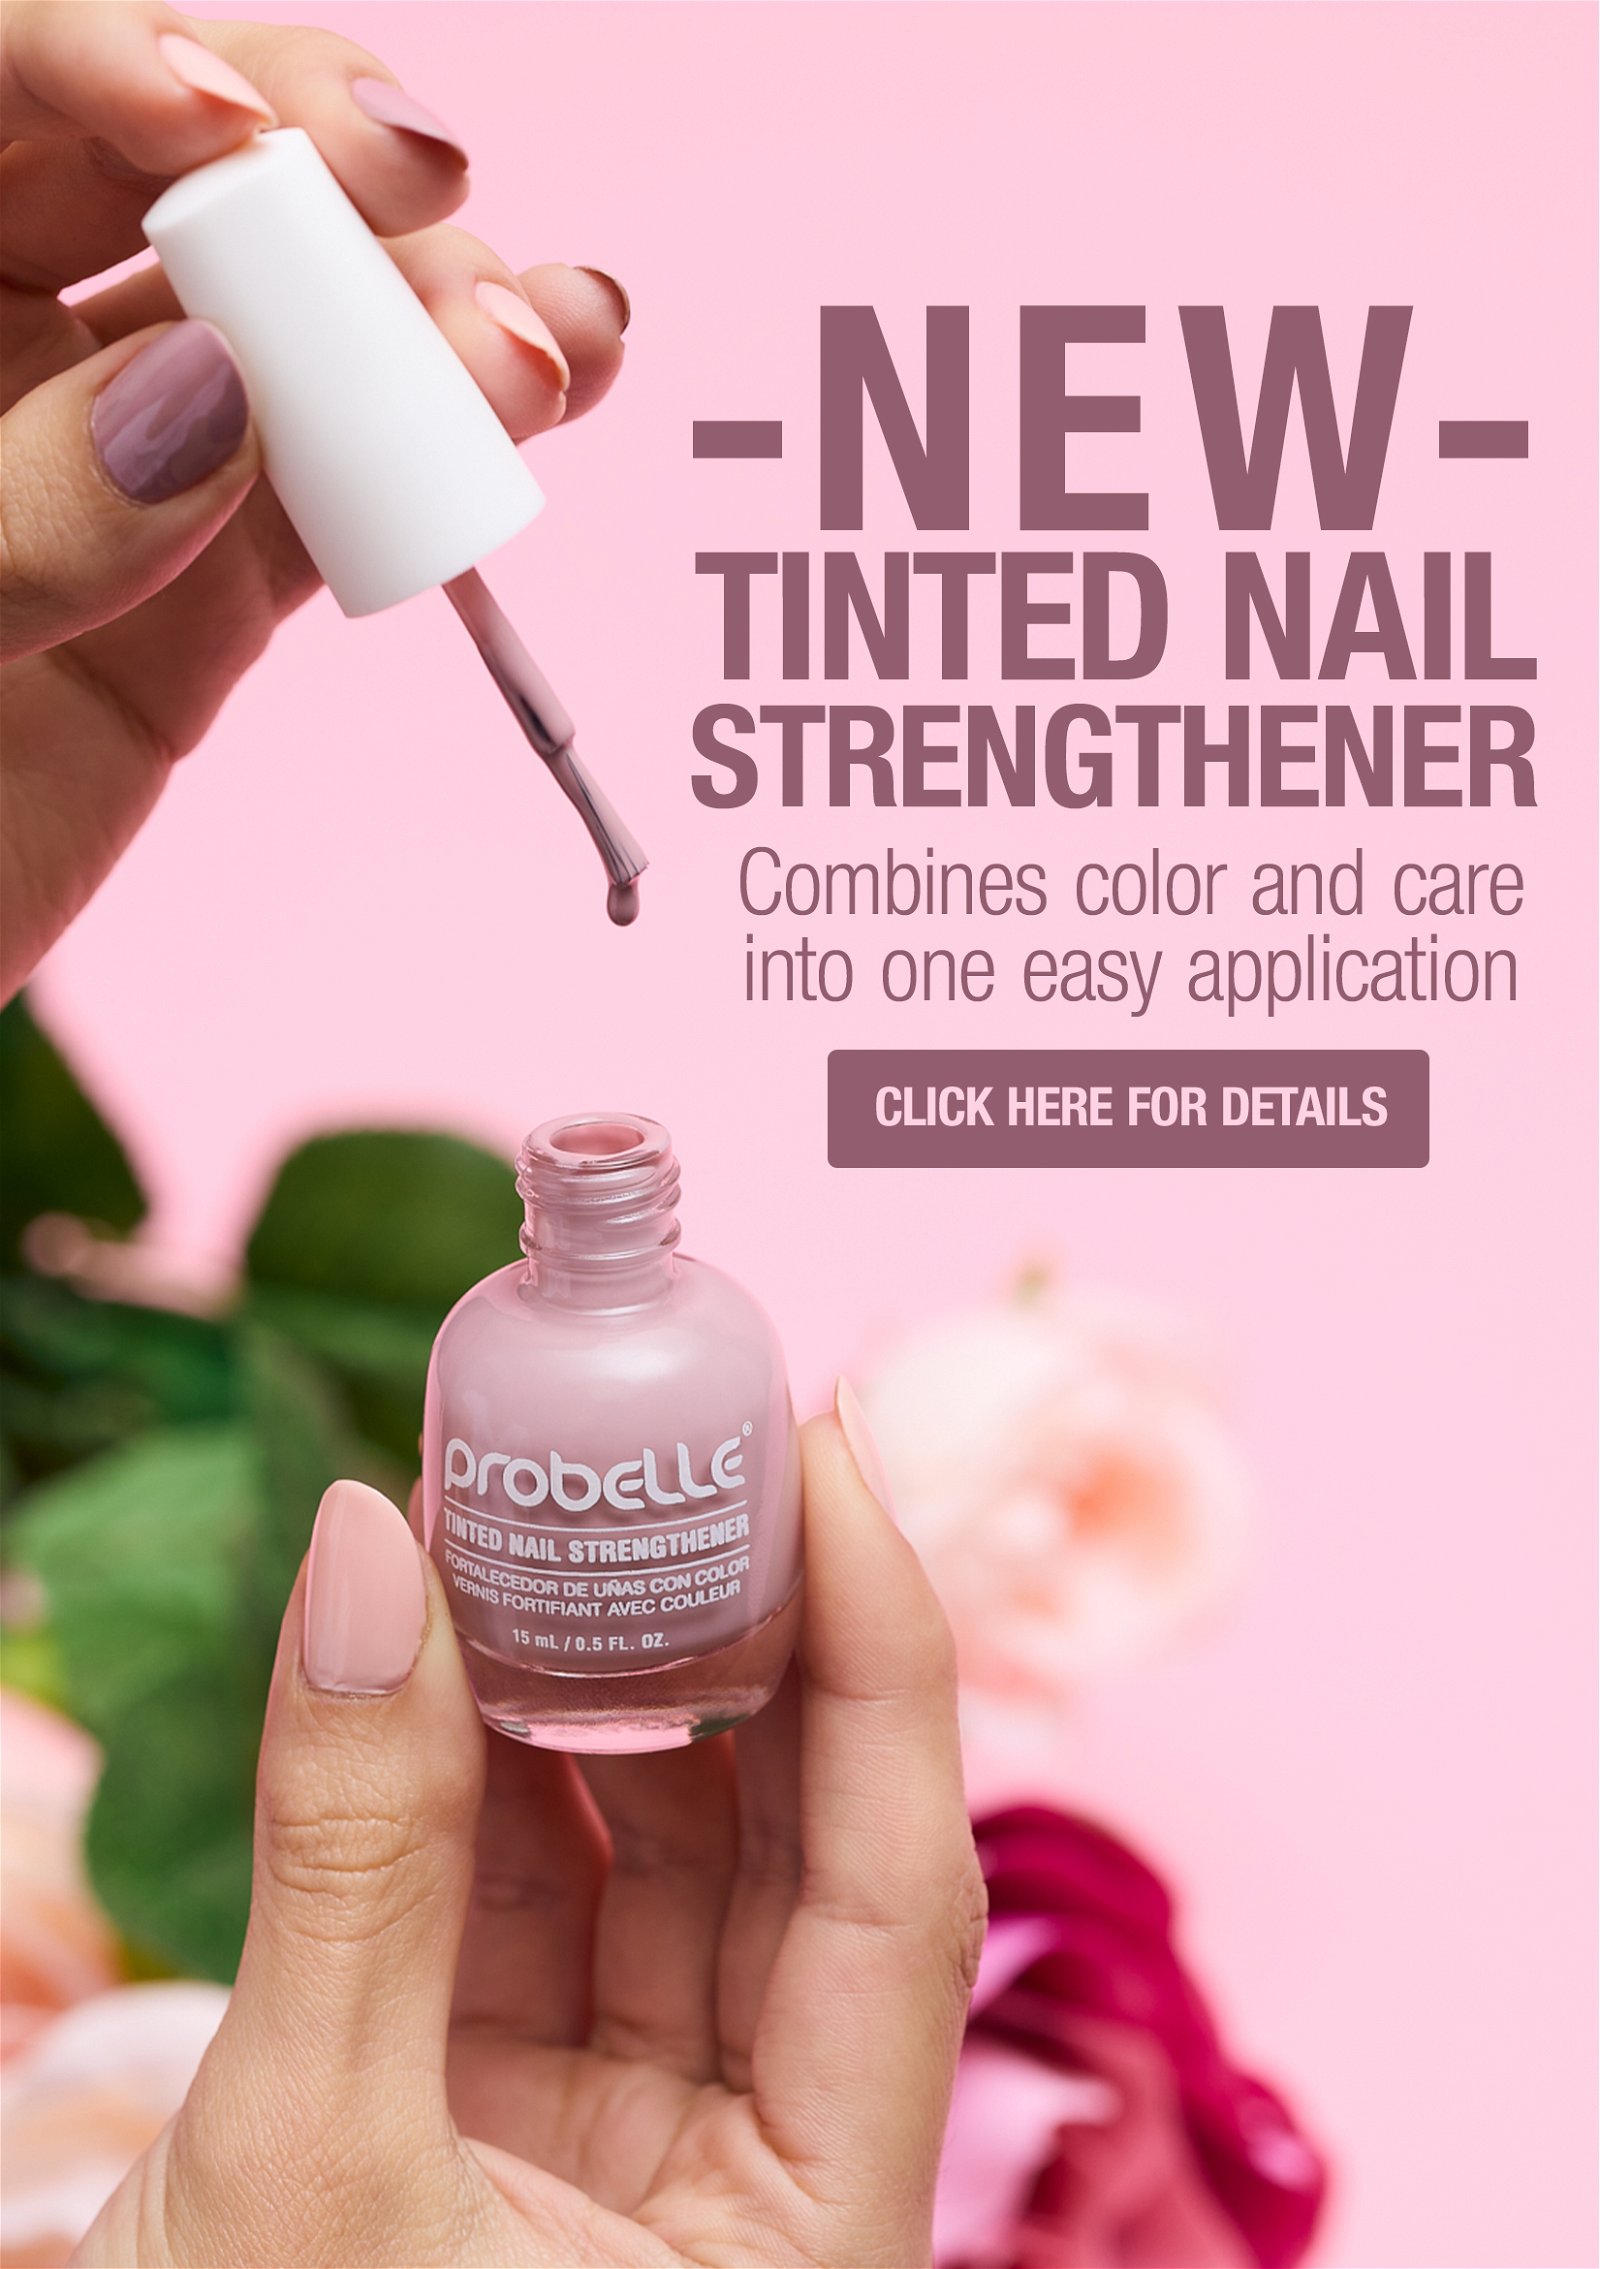 New Probelle Tinted Nail Strengthener. Color + Care in 1 Easy to Use Application